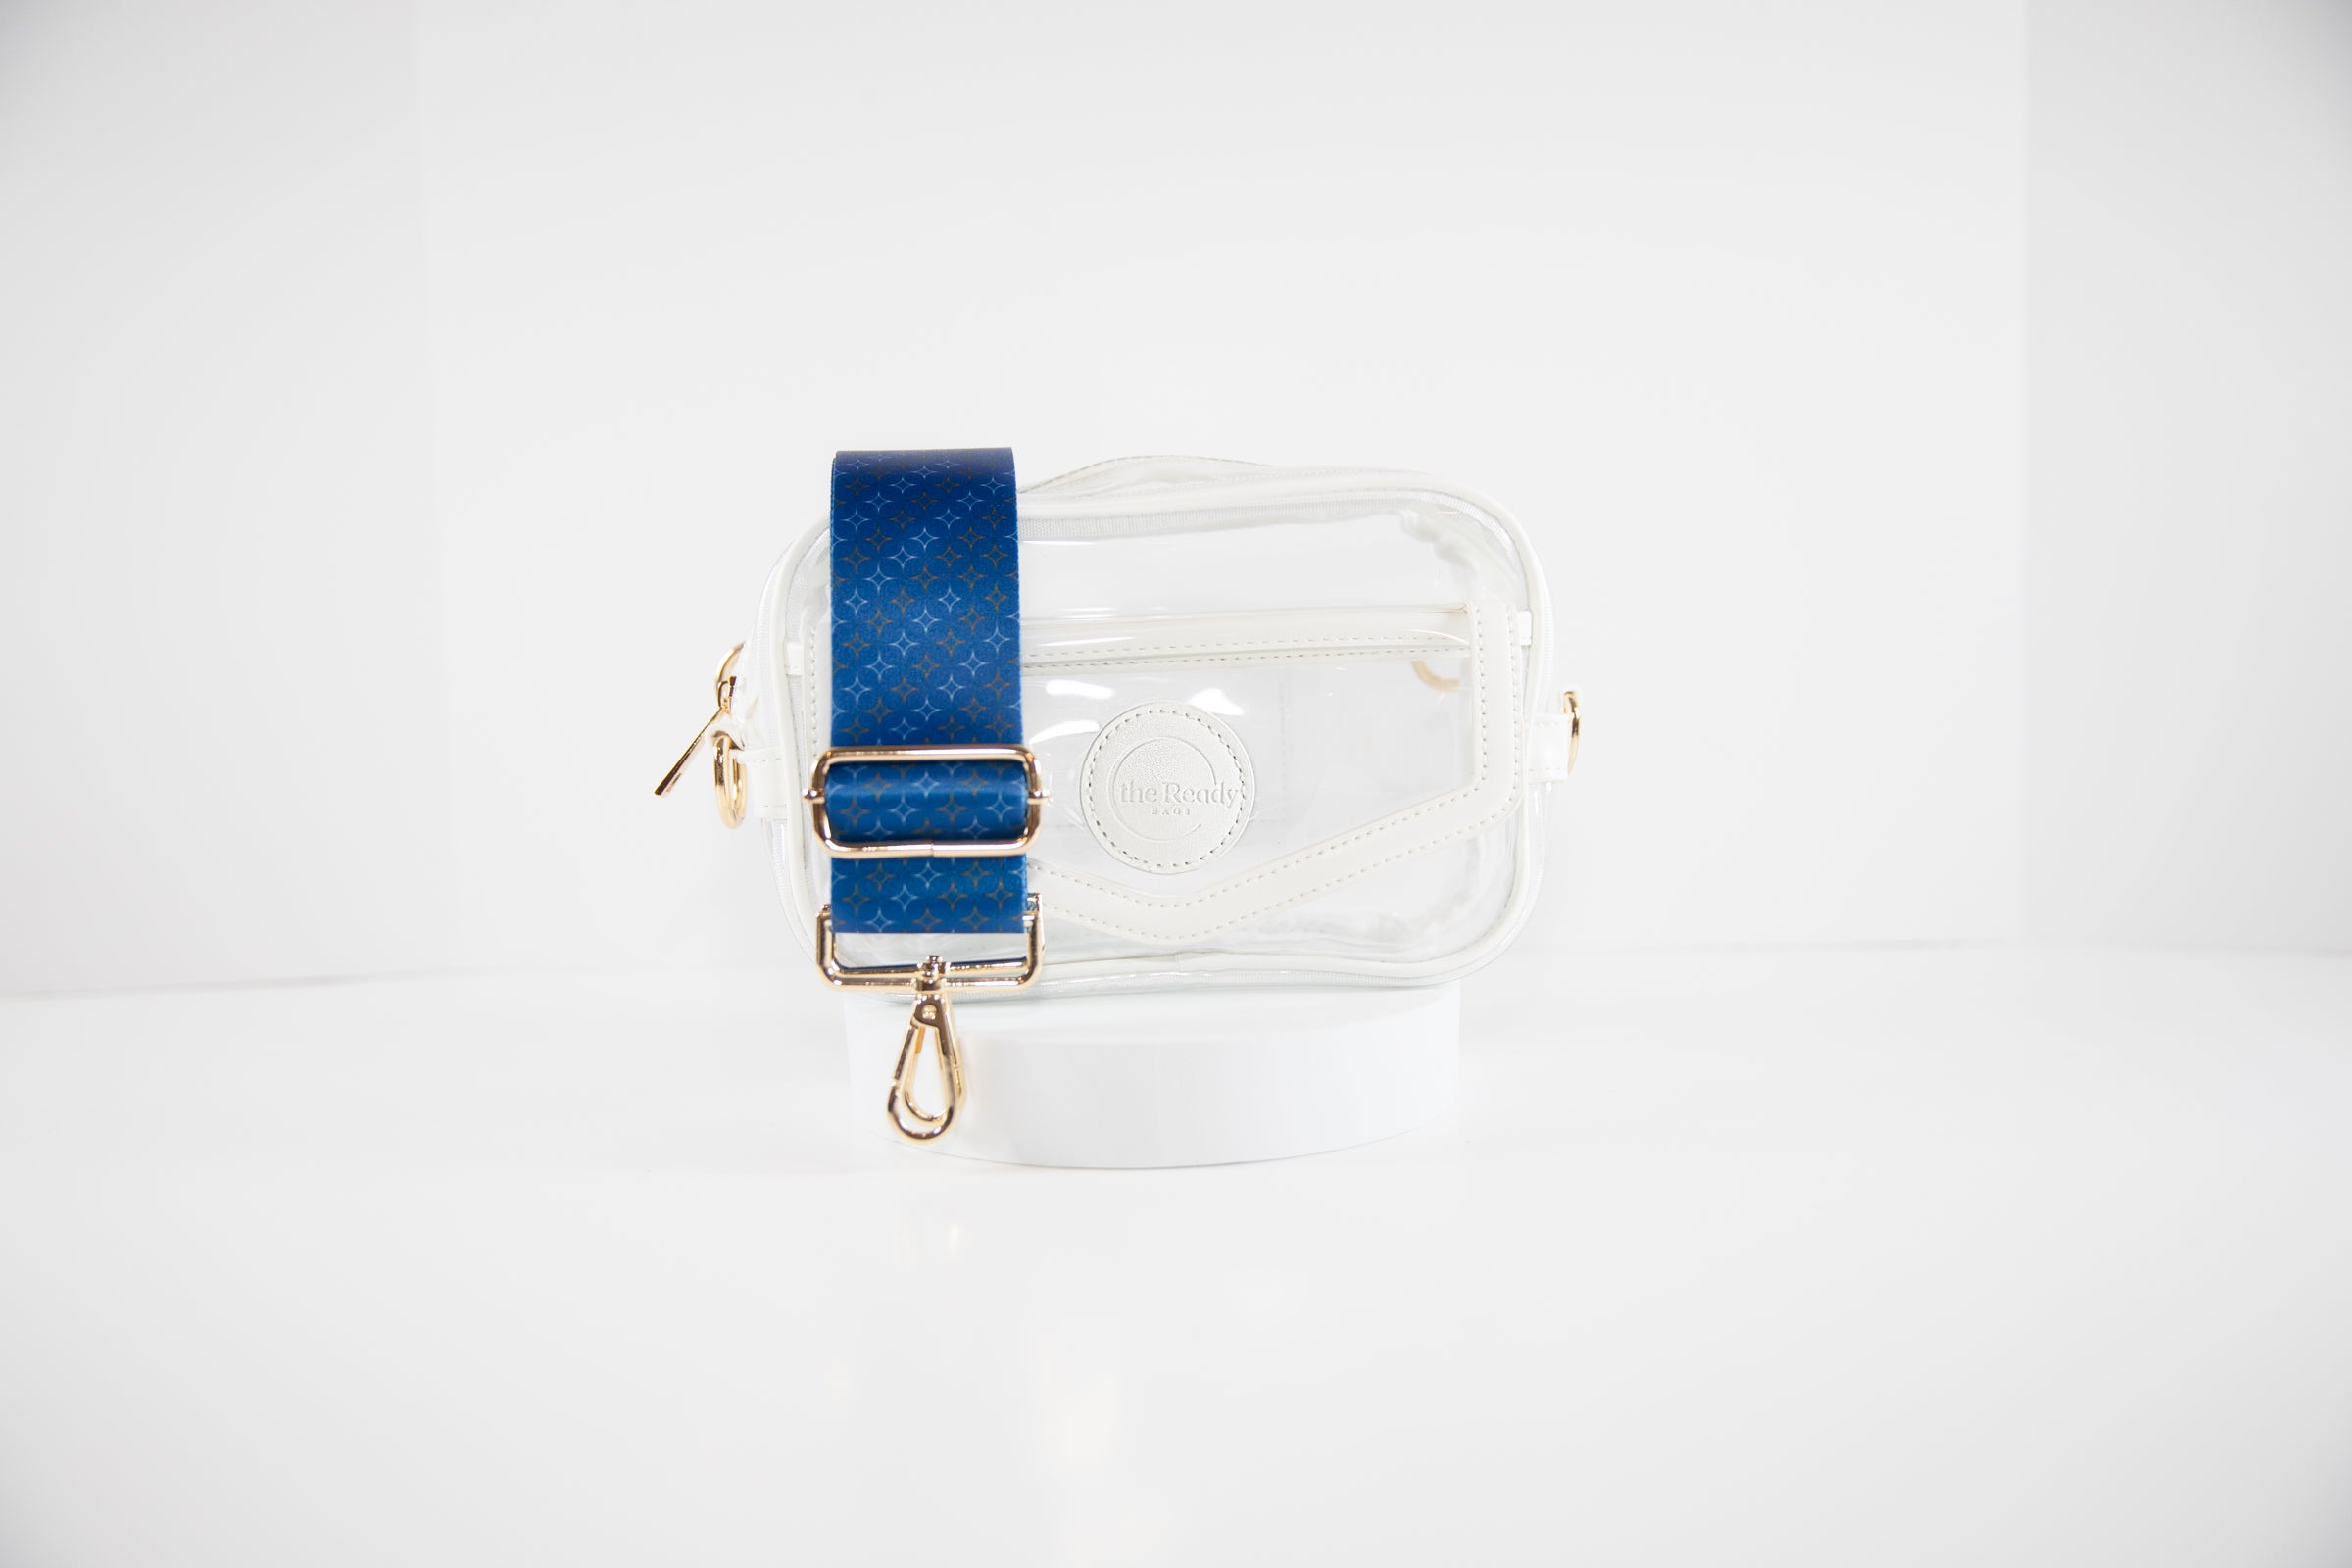 Clear stadium bag in white leather trim shown with crossbody strap in blue, orange and white team colors of the New York Mets